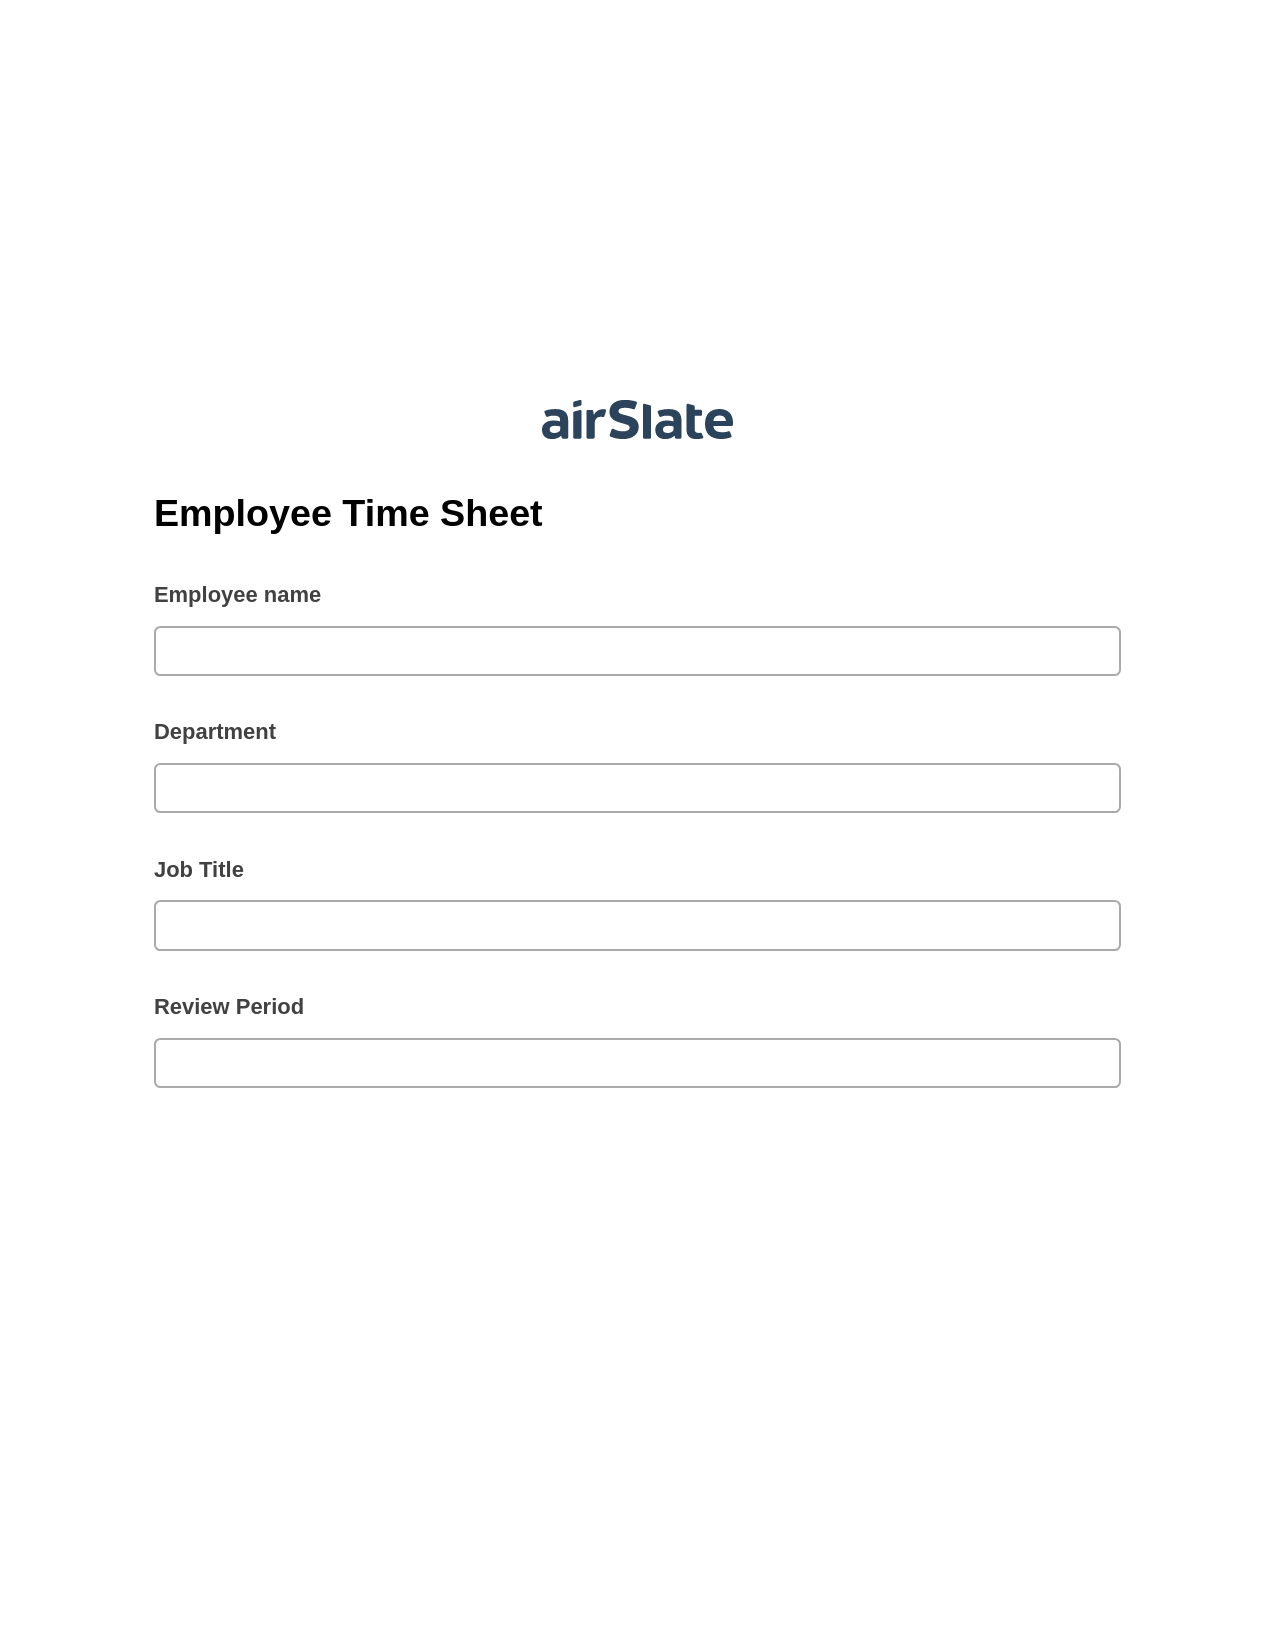 Employee Time Sheet Pre-fill Dropdowns from MySQL Bot, Create slate addon, Export to Excel 365 Bot